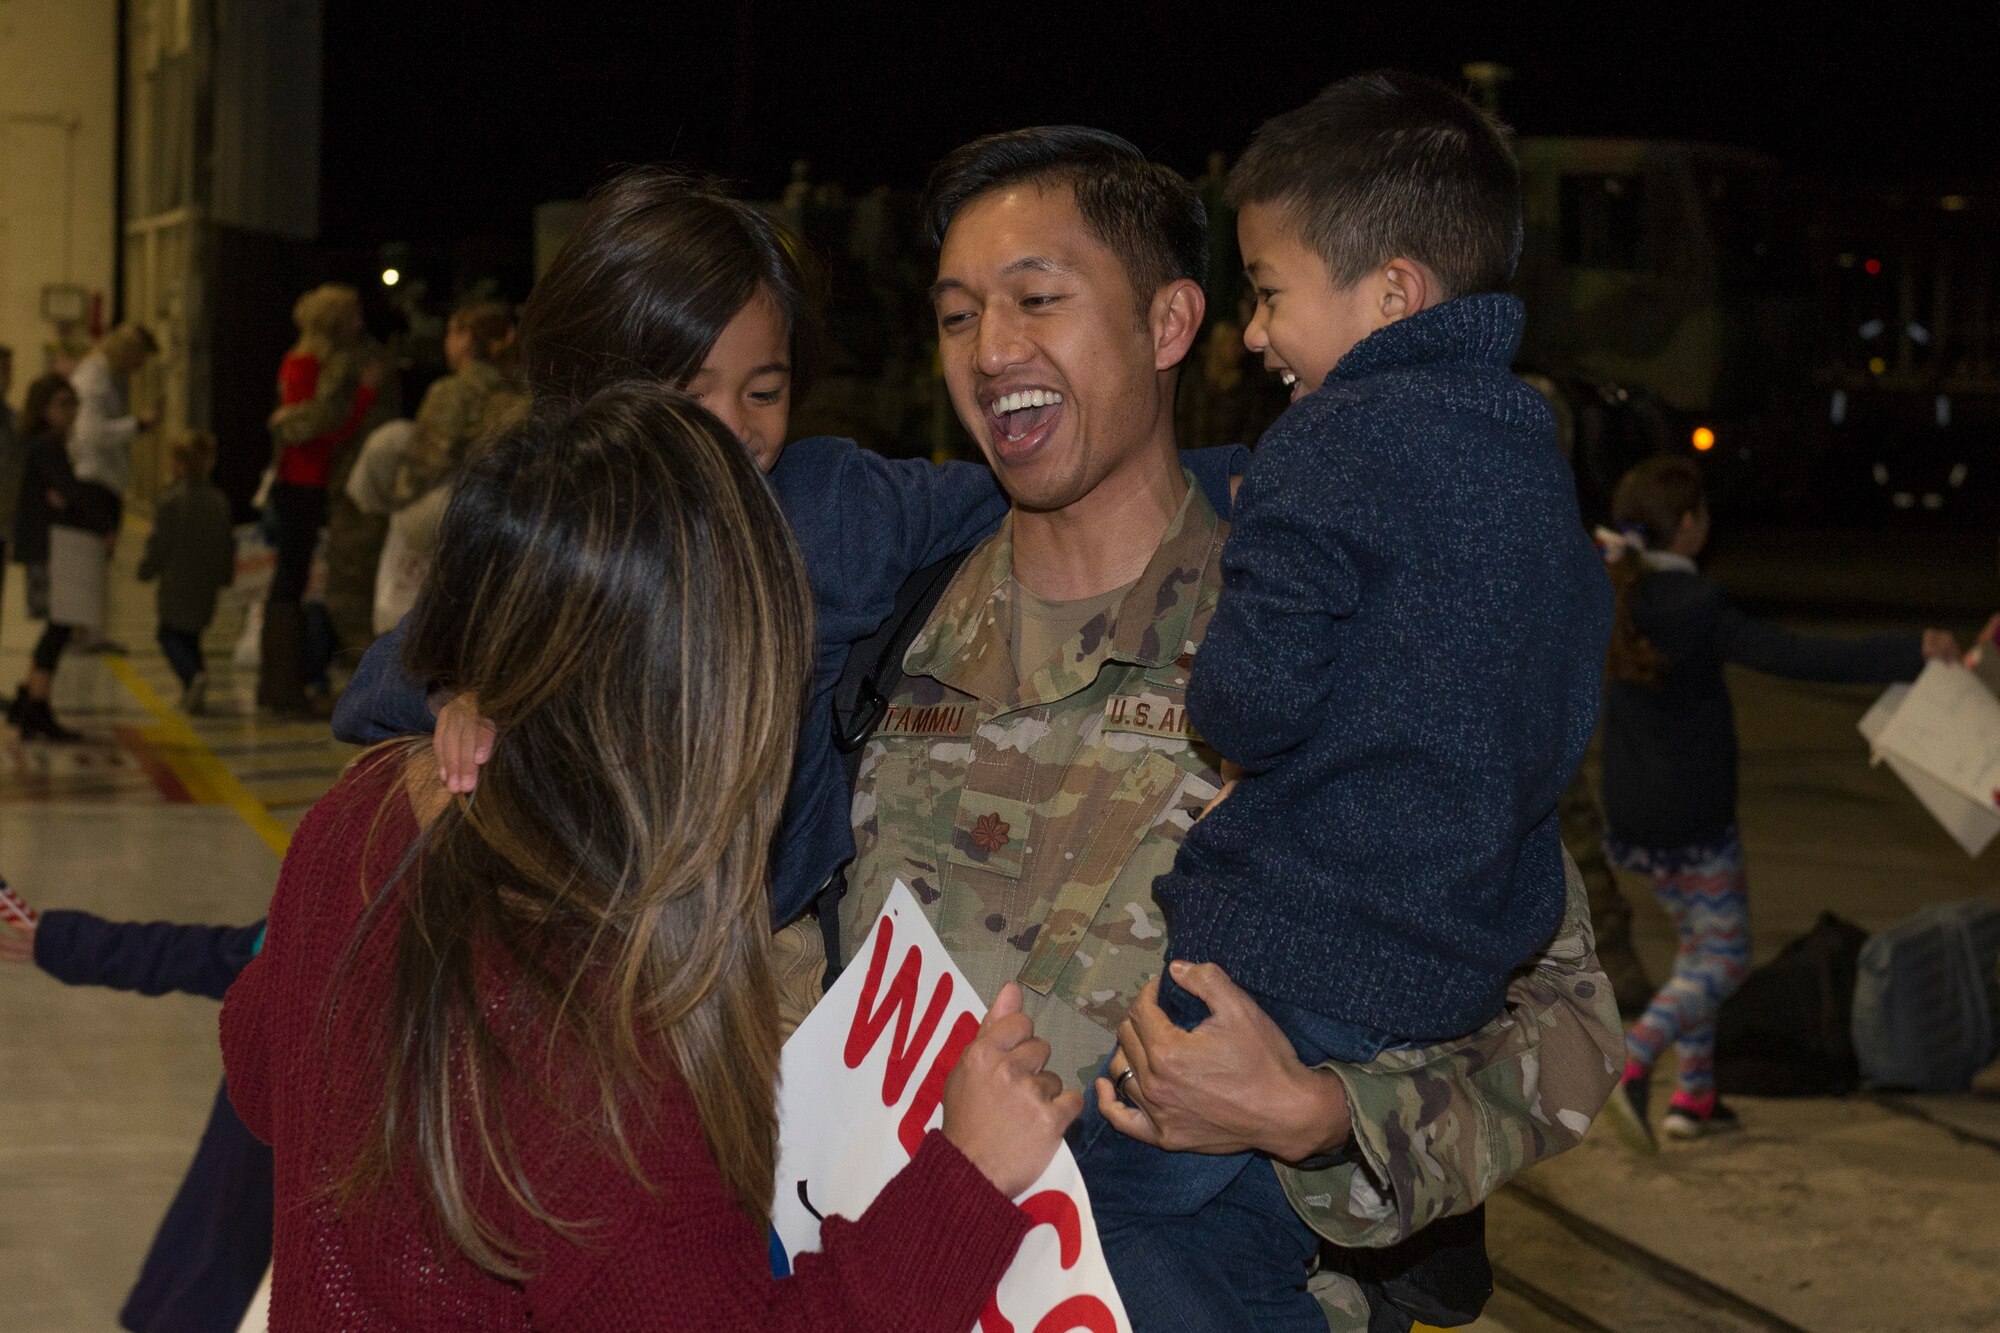 An Airman from the 726th Air Control Squadron returns from deployment and is greeted by his family, October 27, 2018, at Mountain Home Air Force Base, Idaho. 120 Airmen from the 726th ACS deployed with mission of supporting communication between air craft and ground units. (U.S. Air Force photo by Senior Airman Tyrell Hall)